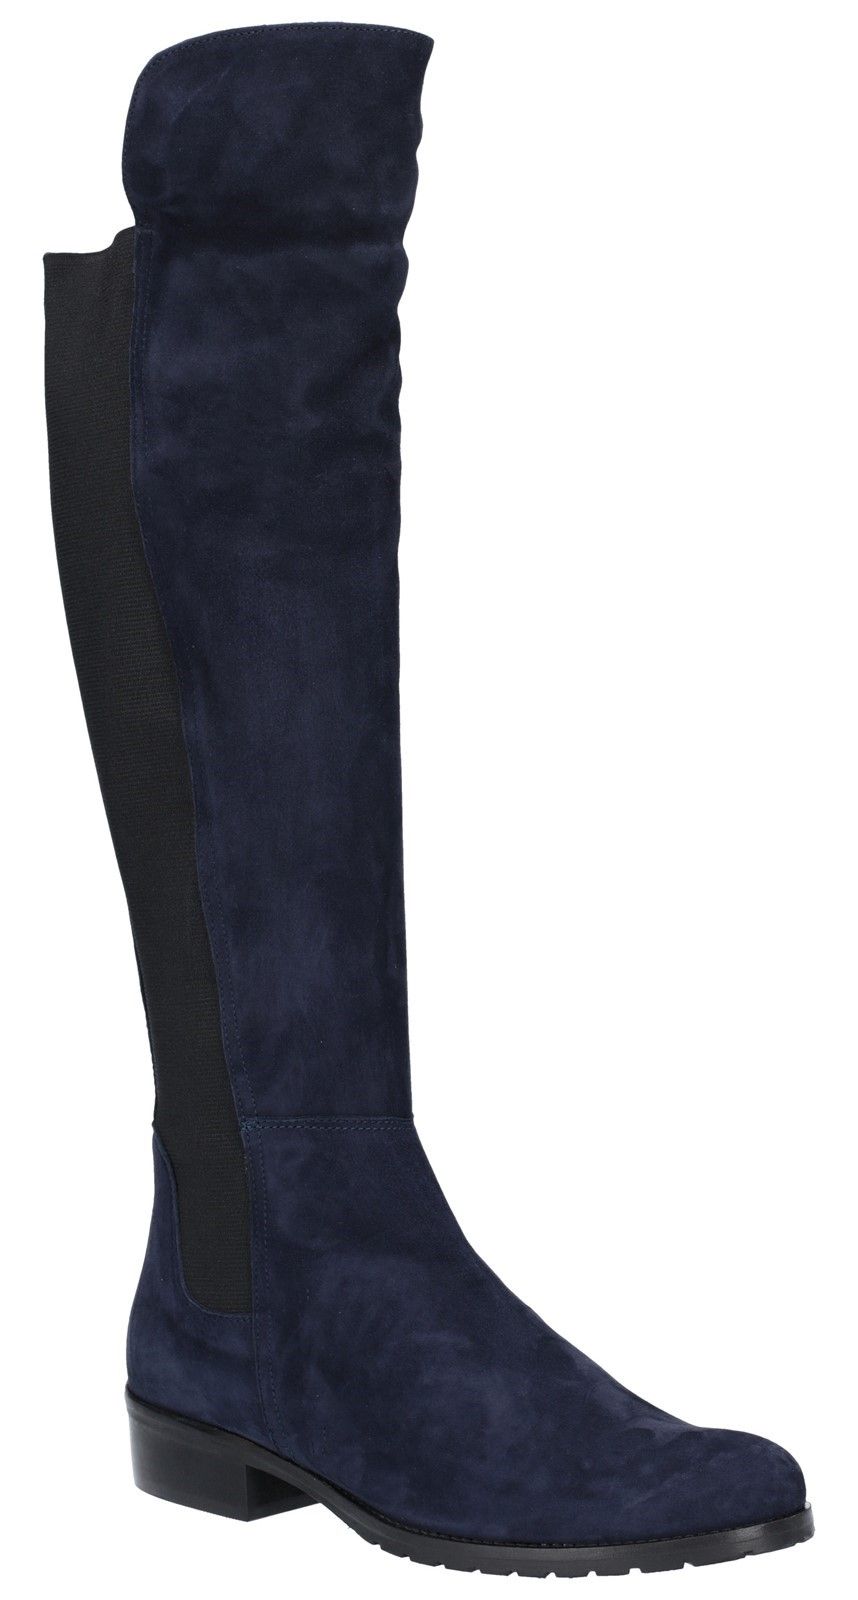 Ladies knee high suede leather boots with full length elastic panel for comfort.Ladies' knee high suede leather pull up boots. 
Soft suede leather upper. 
Full length elasticated comfort panel. 
Contoured heel stiffener. 
Comfortable rounded toe.